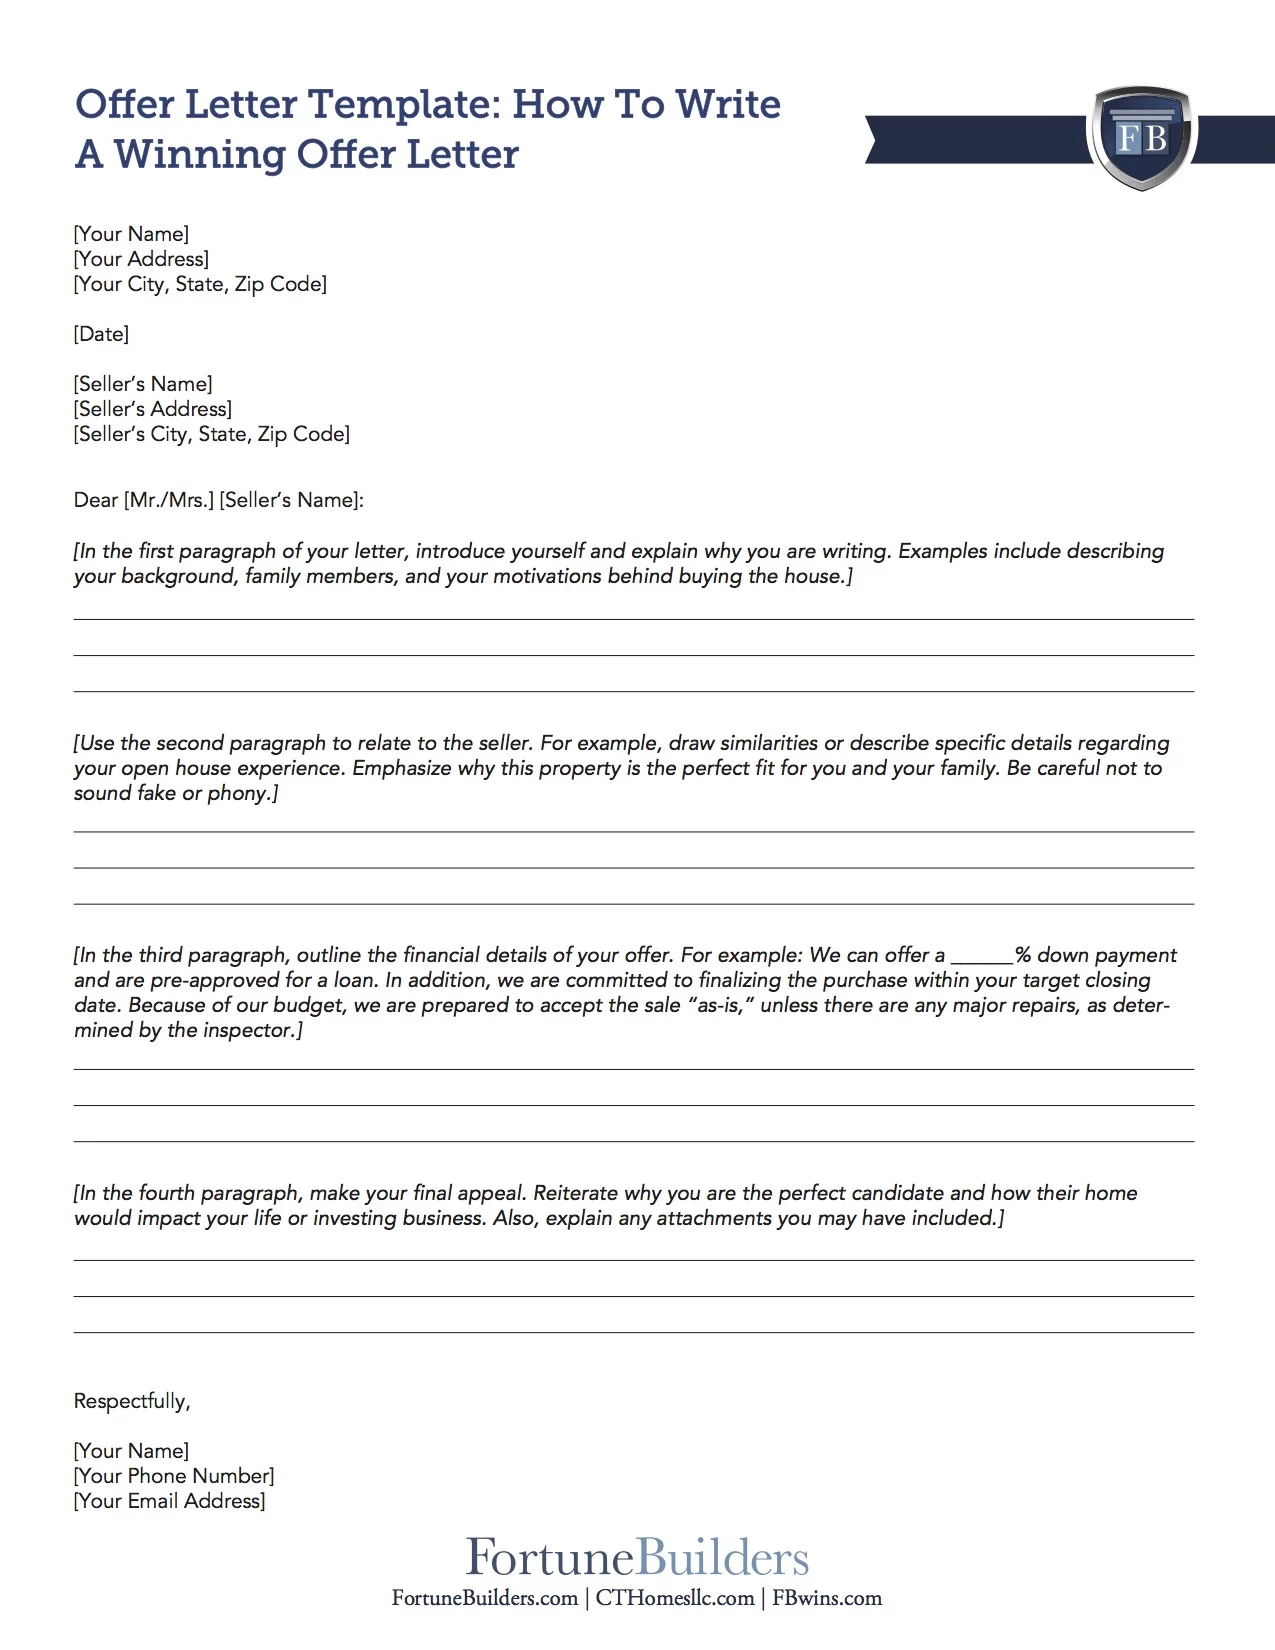 letter-of-appointment-template-free-download